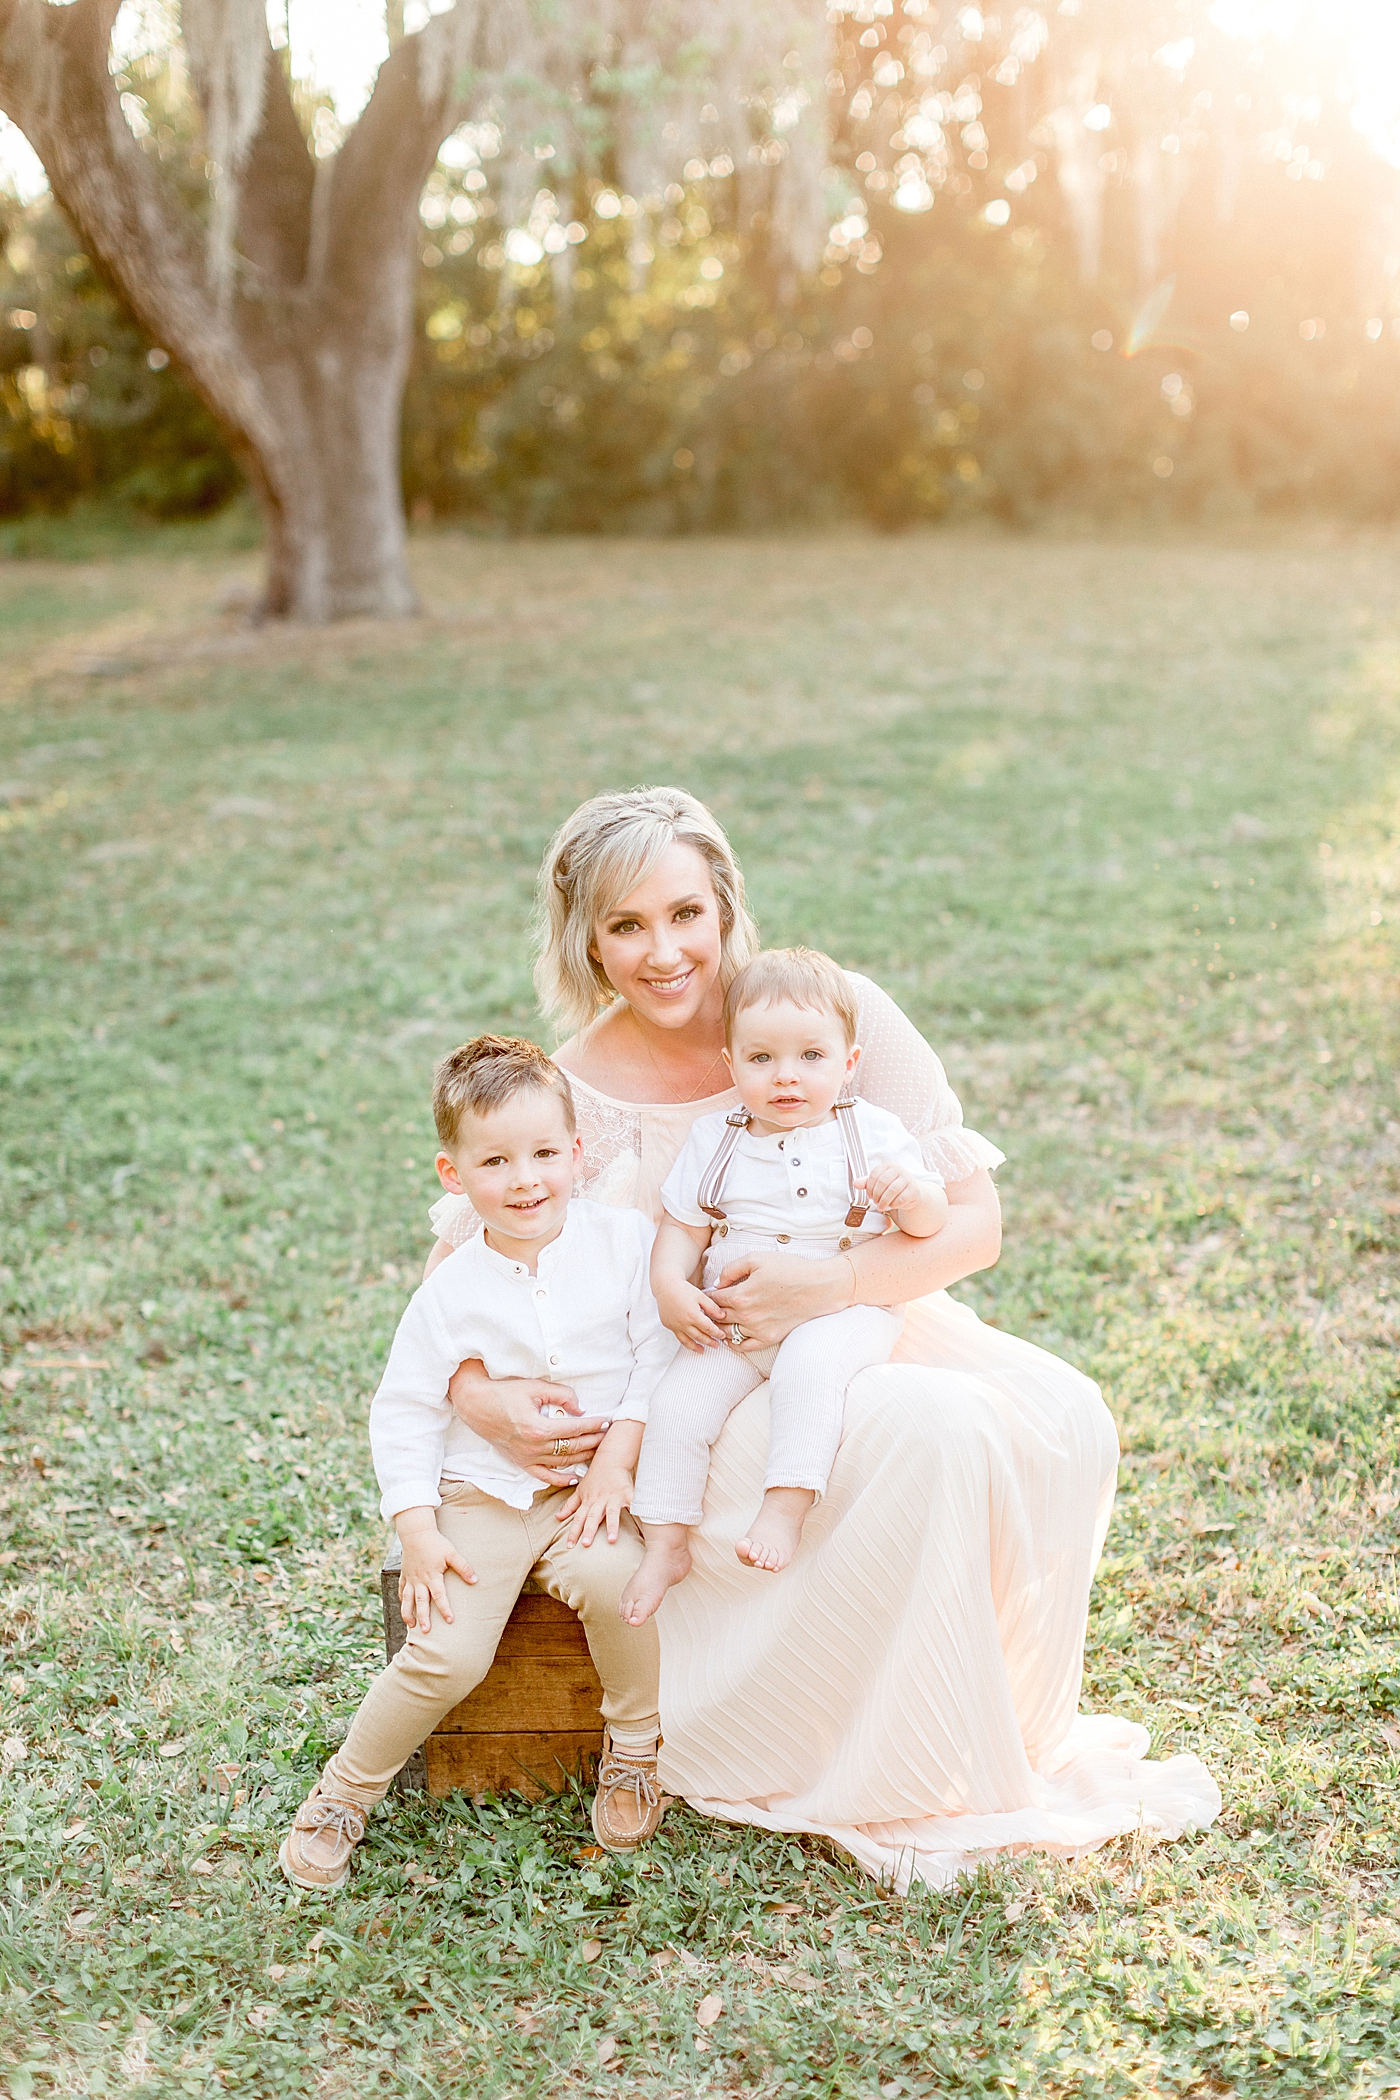 Sunset photo of Mom and two sons. Photo by Brittany Elise Photography.